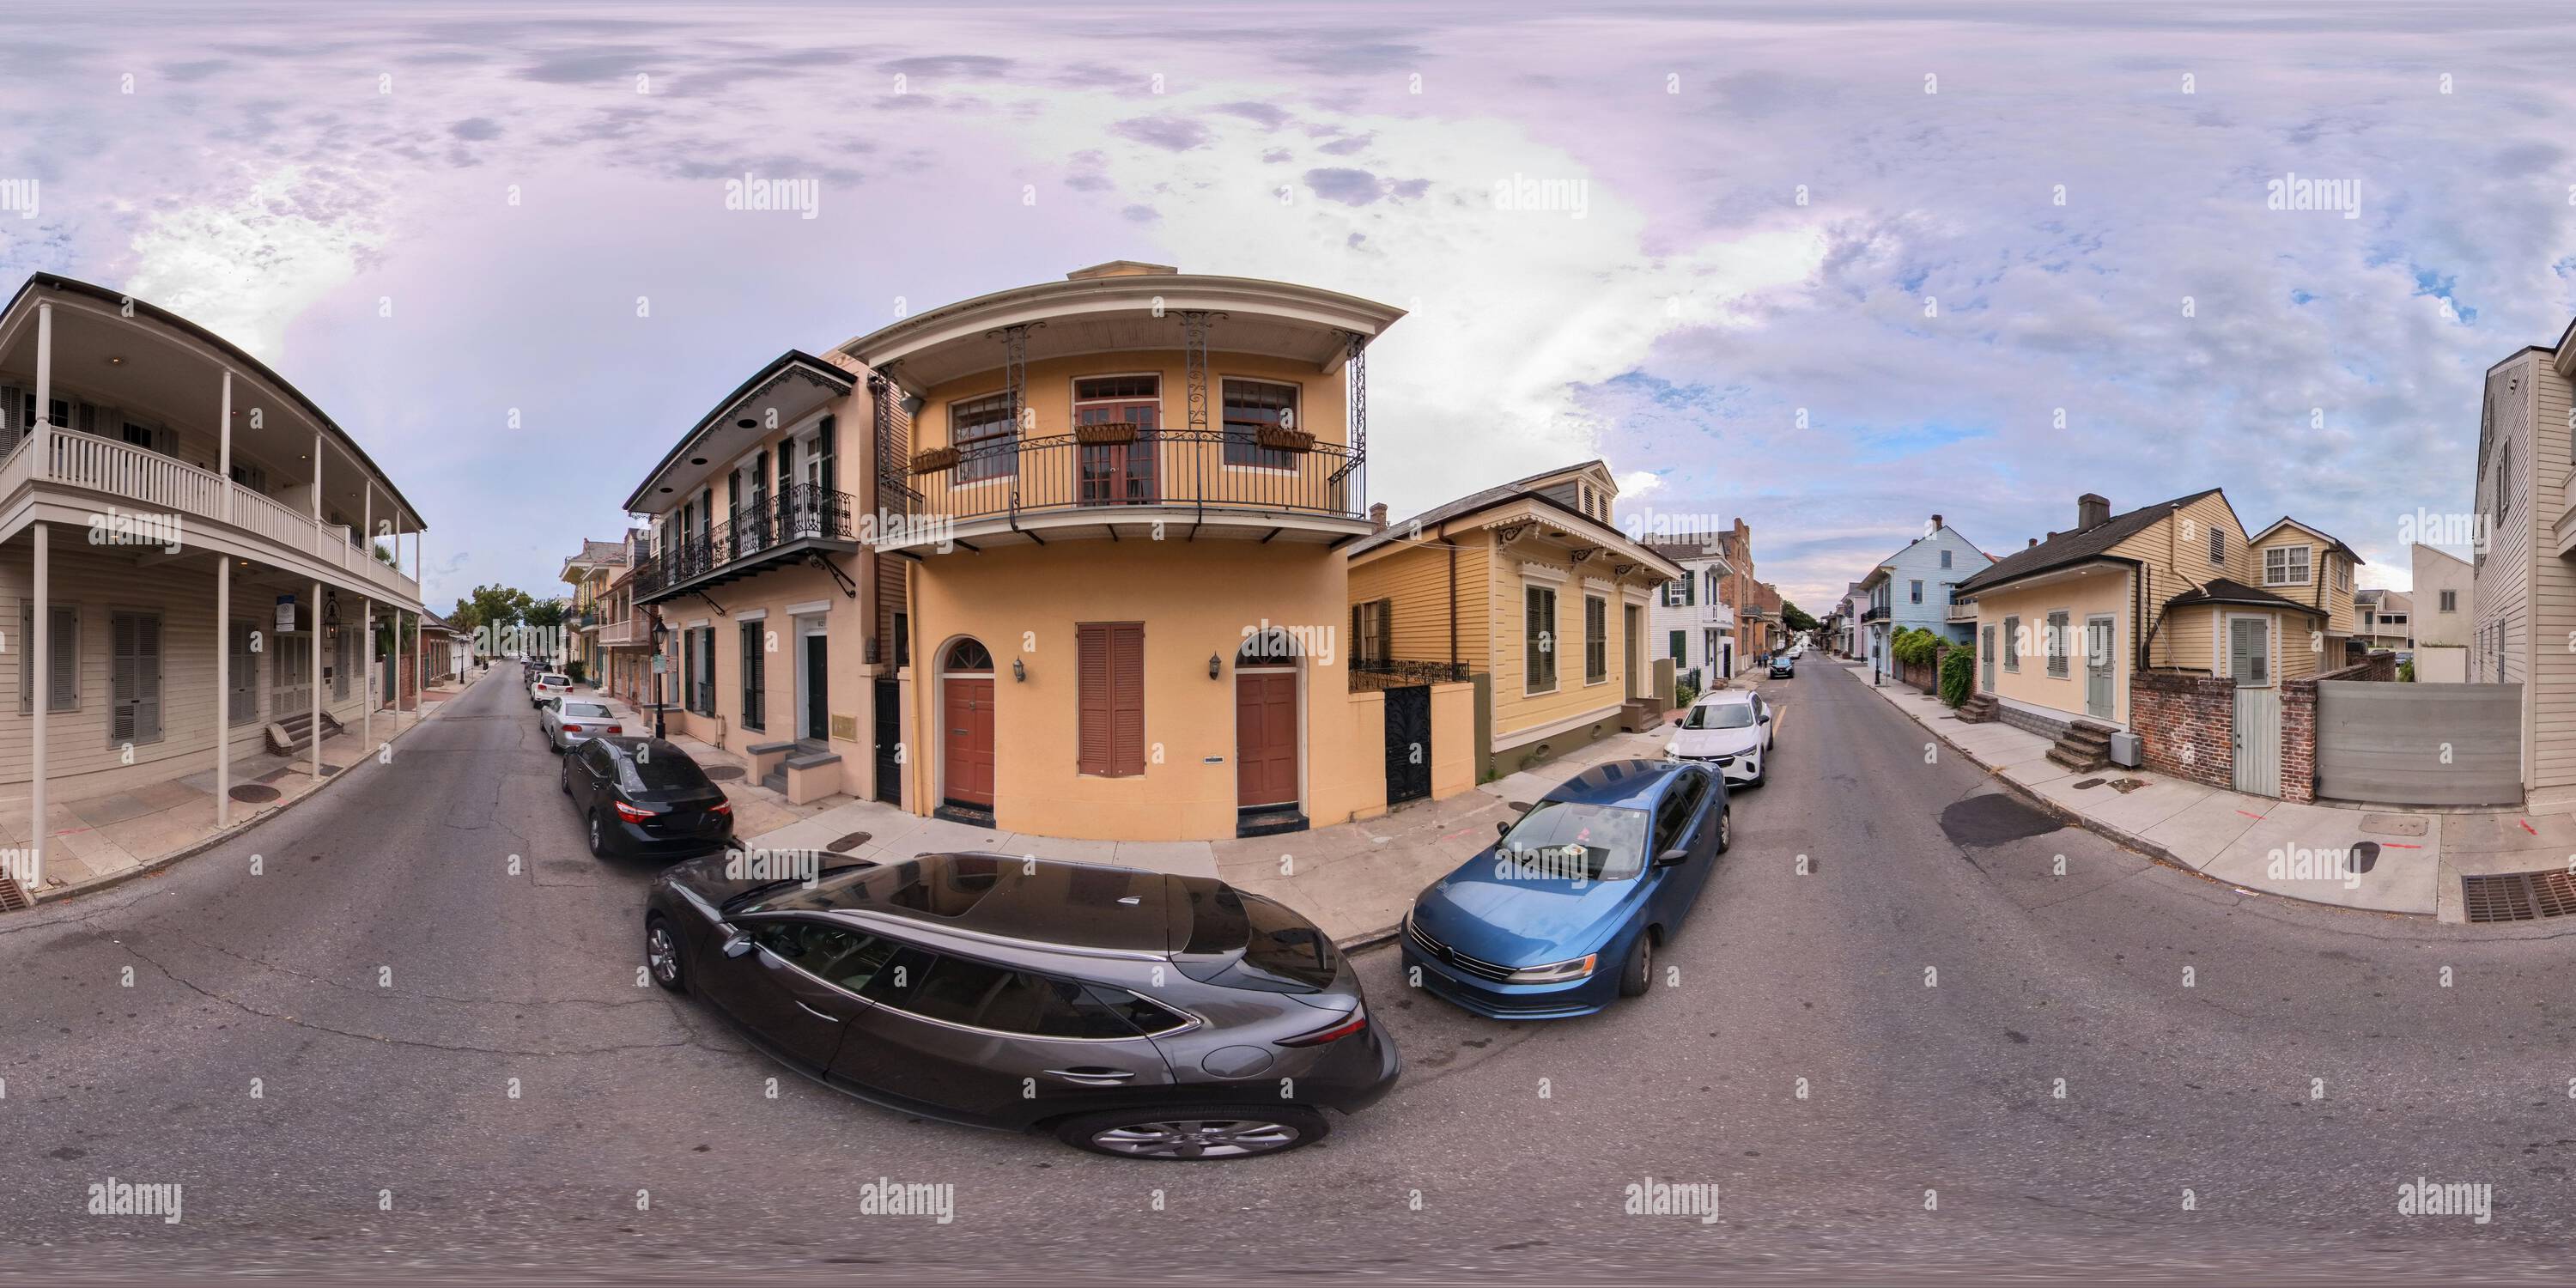 360 degree panoramic view of 360 vr equirectangular image of historic architecture New Orleans French Quarter